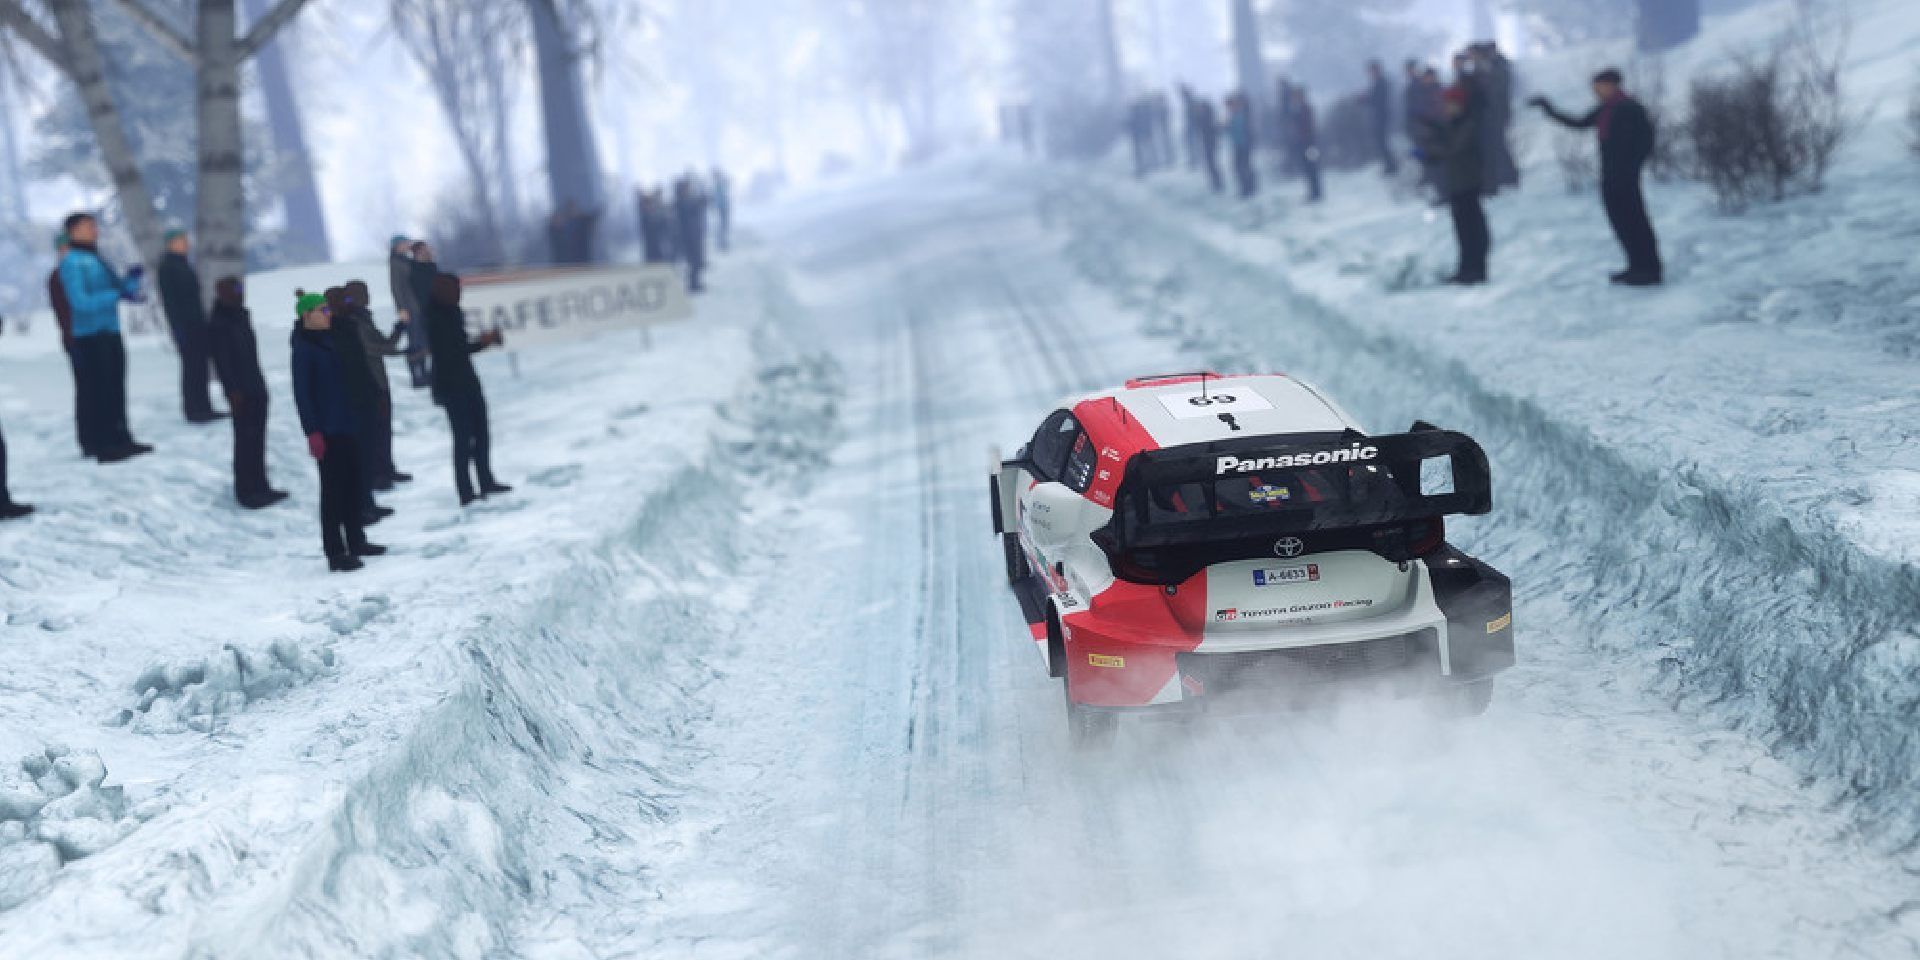 wrc generations player racing in the snow 